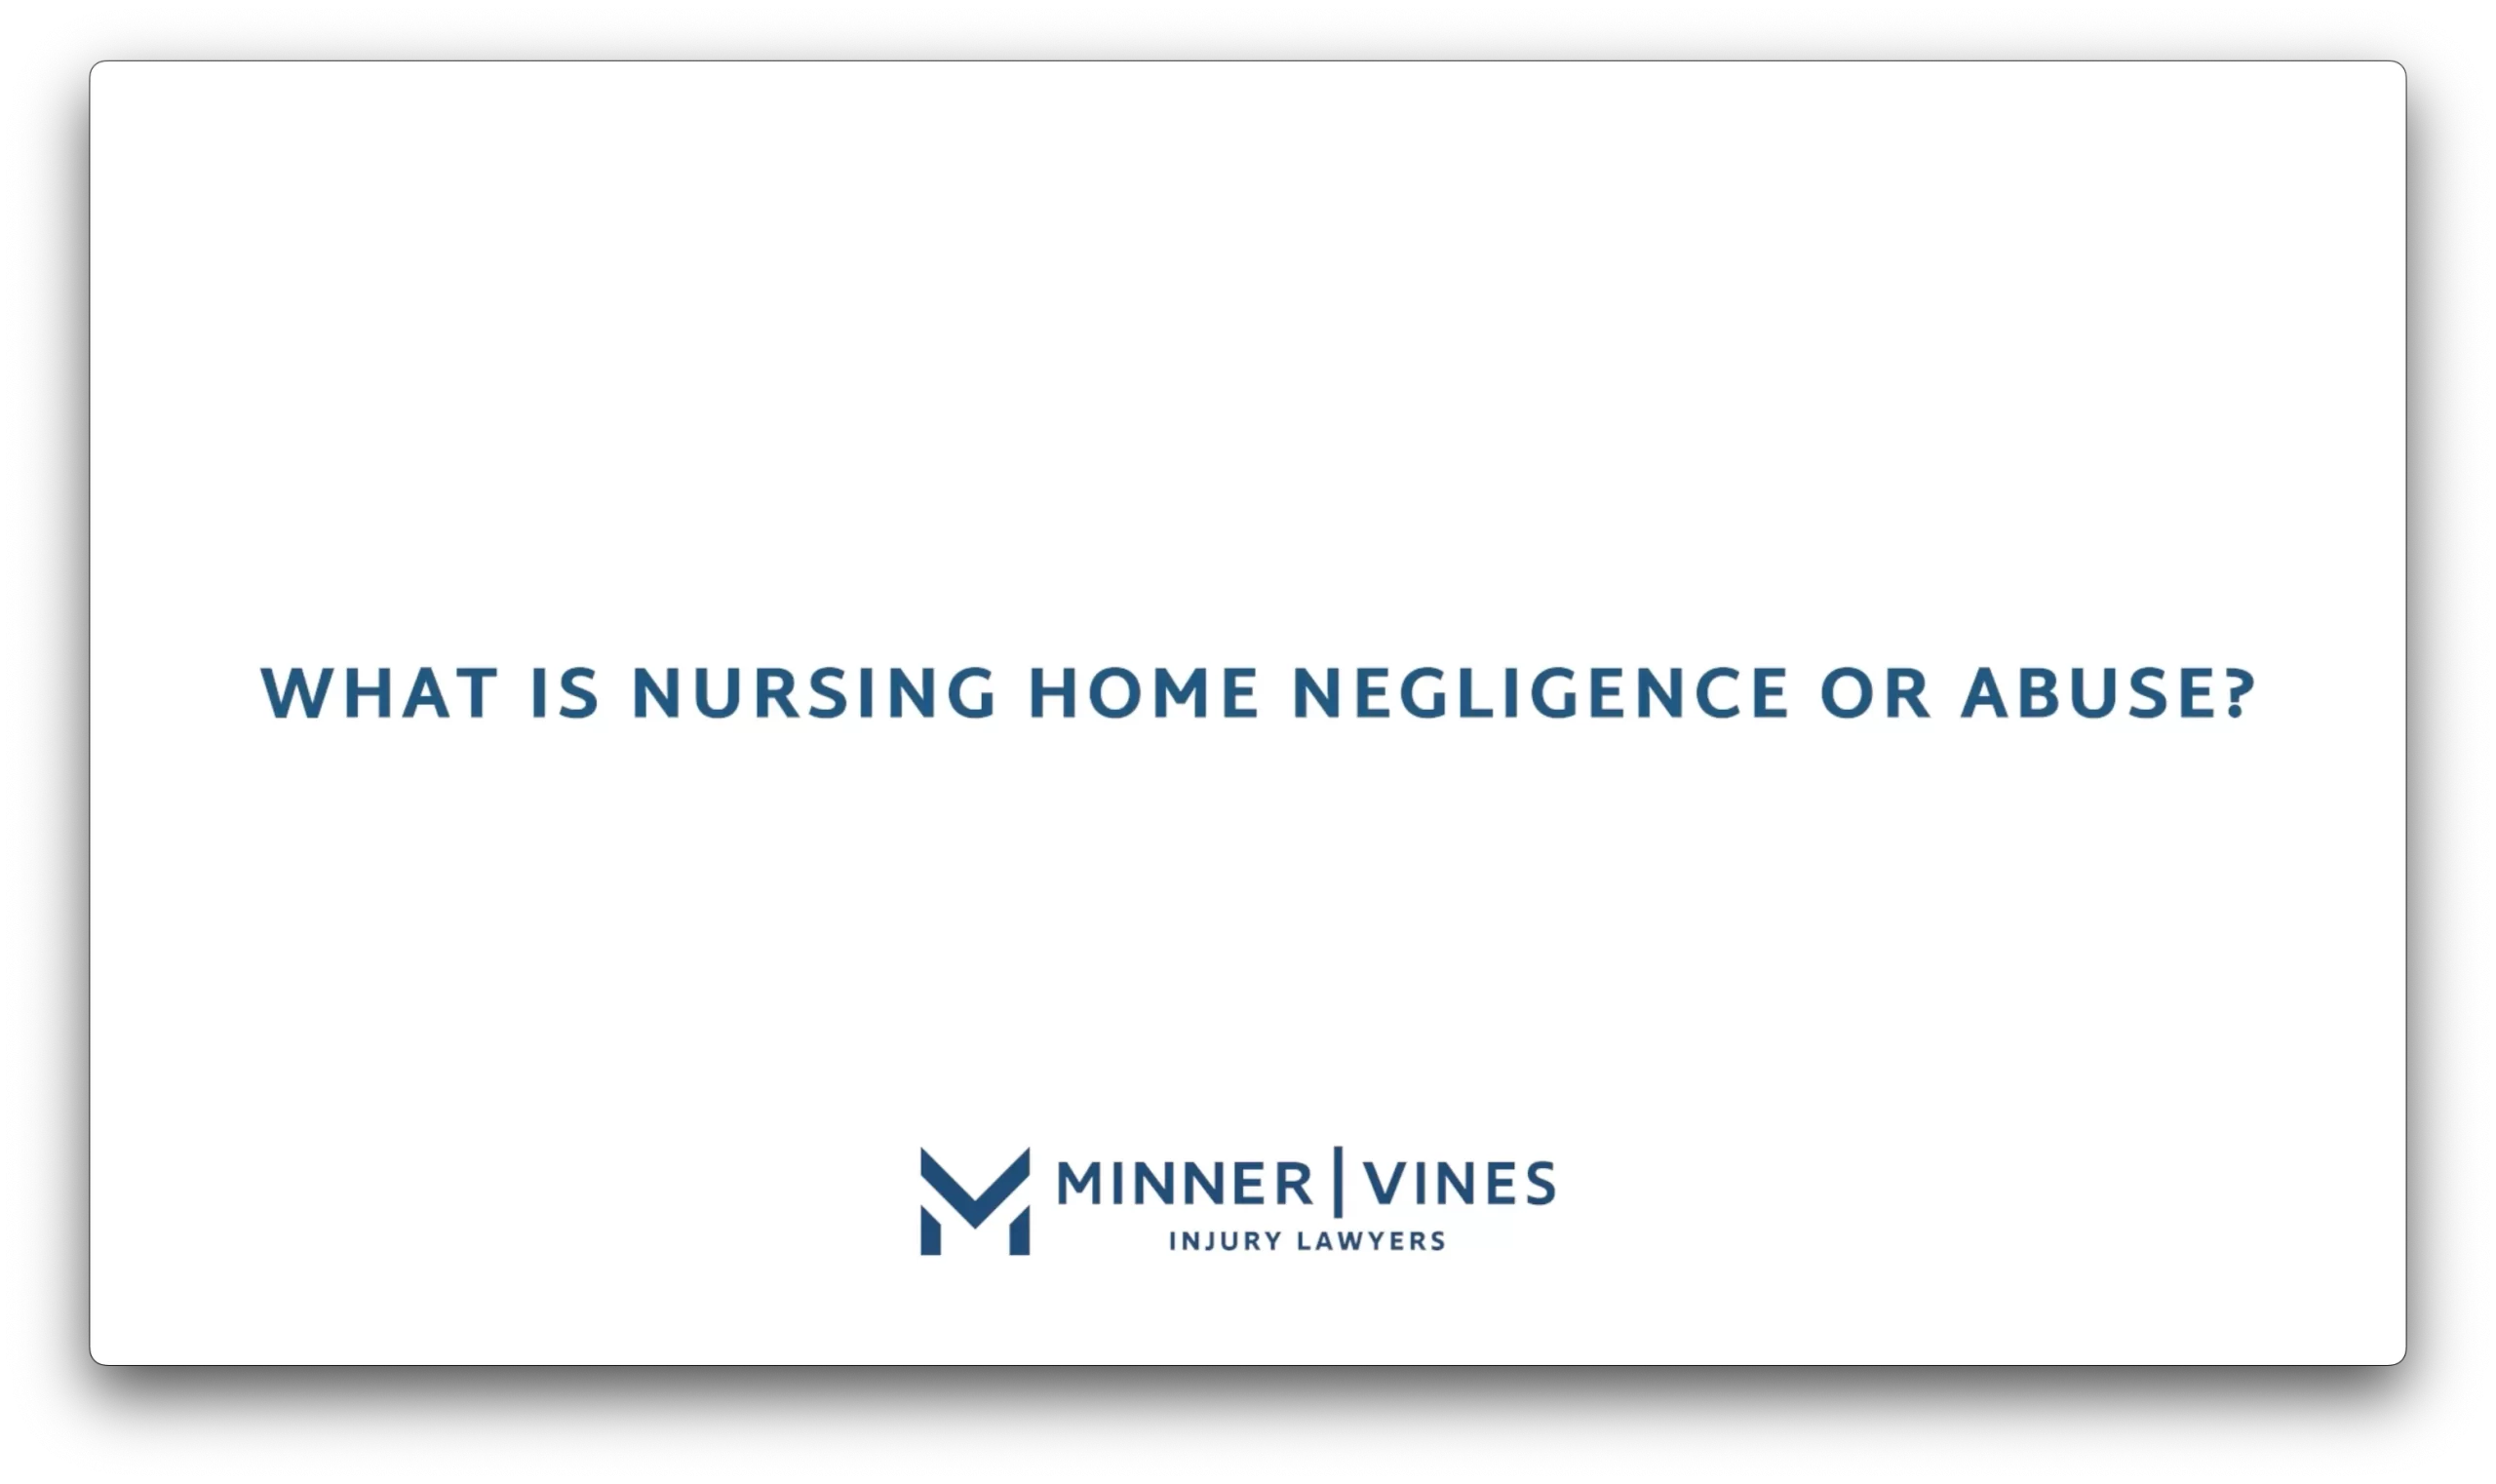 What is nursing home negligence or abuse?